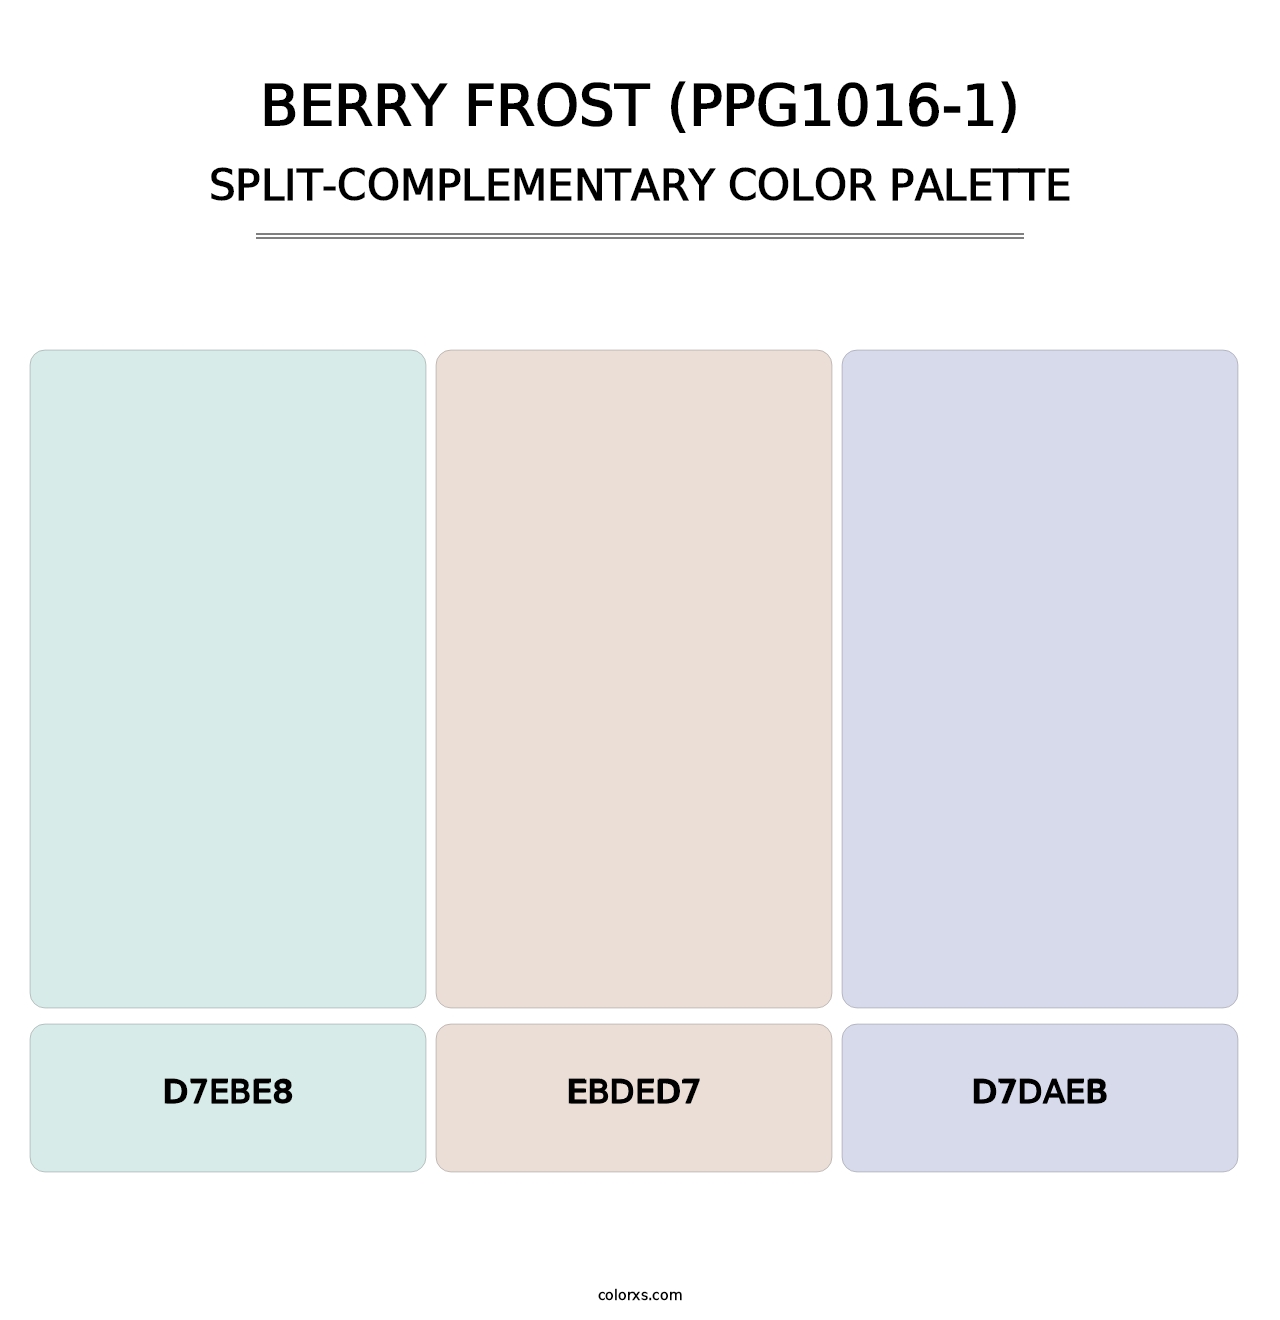 Berry Frost (PPG1016-1) - Split-Complementary Color Palette